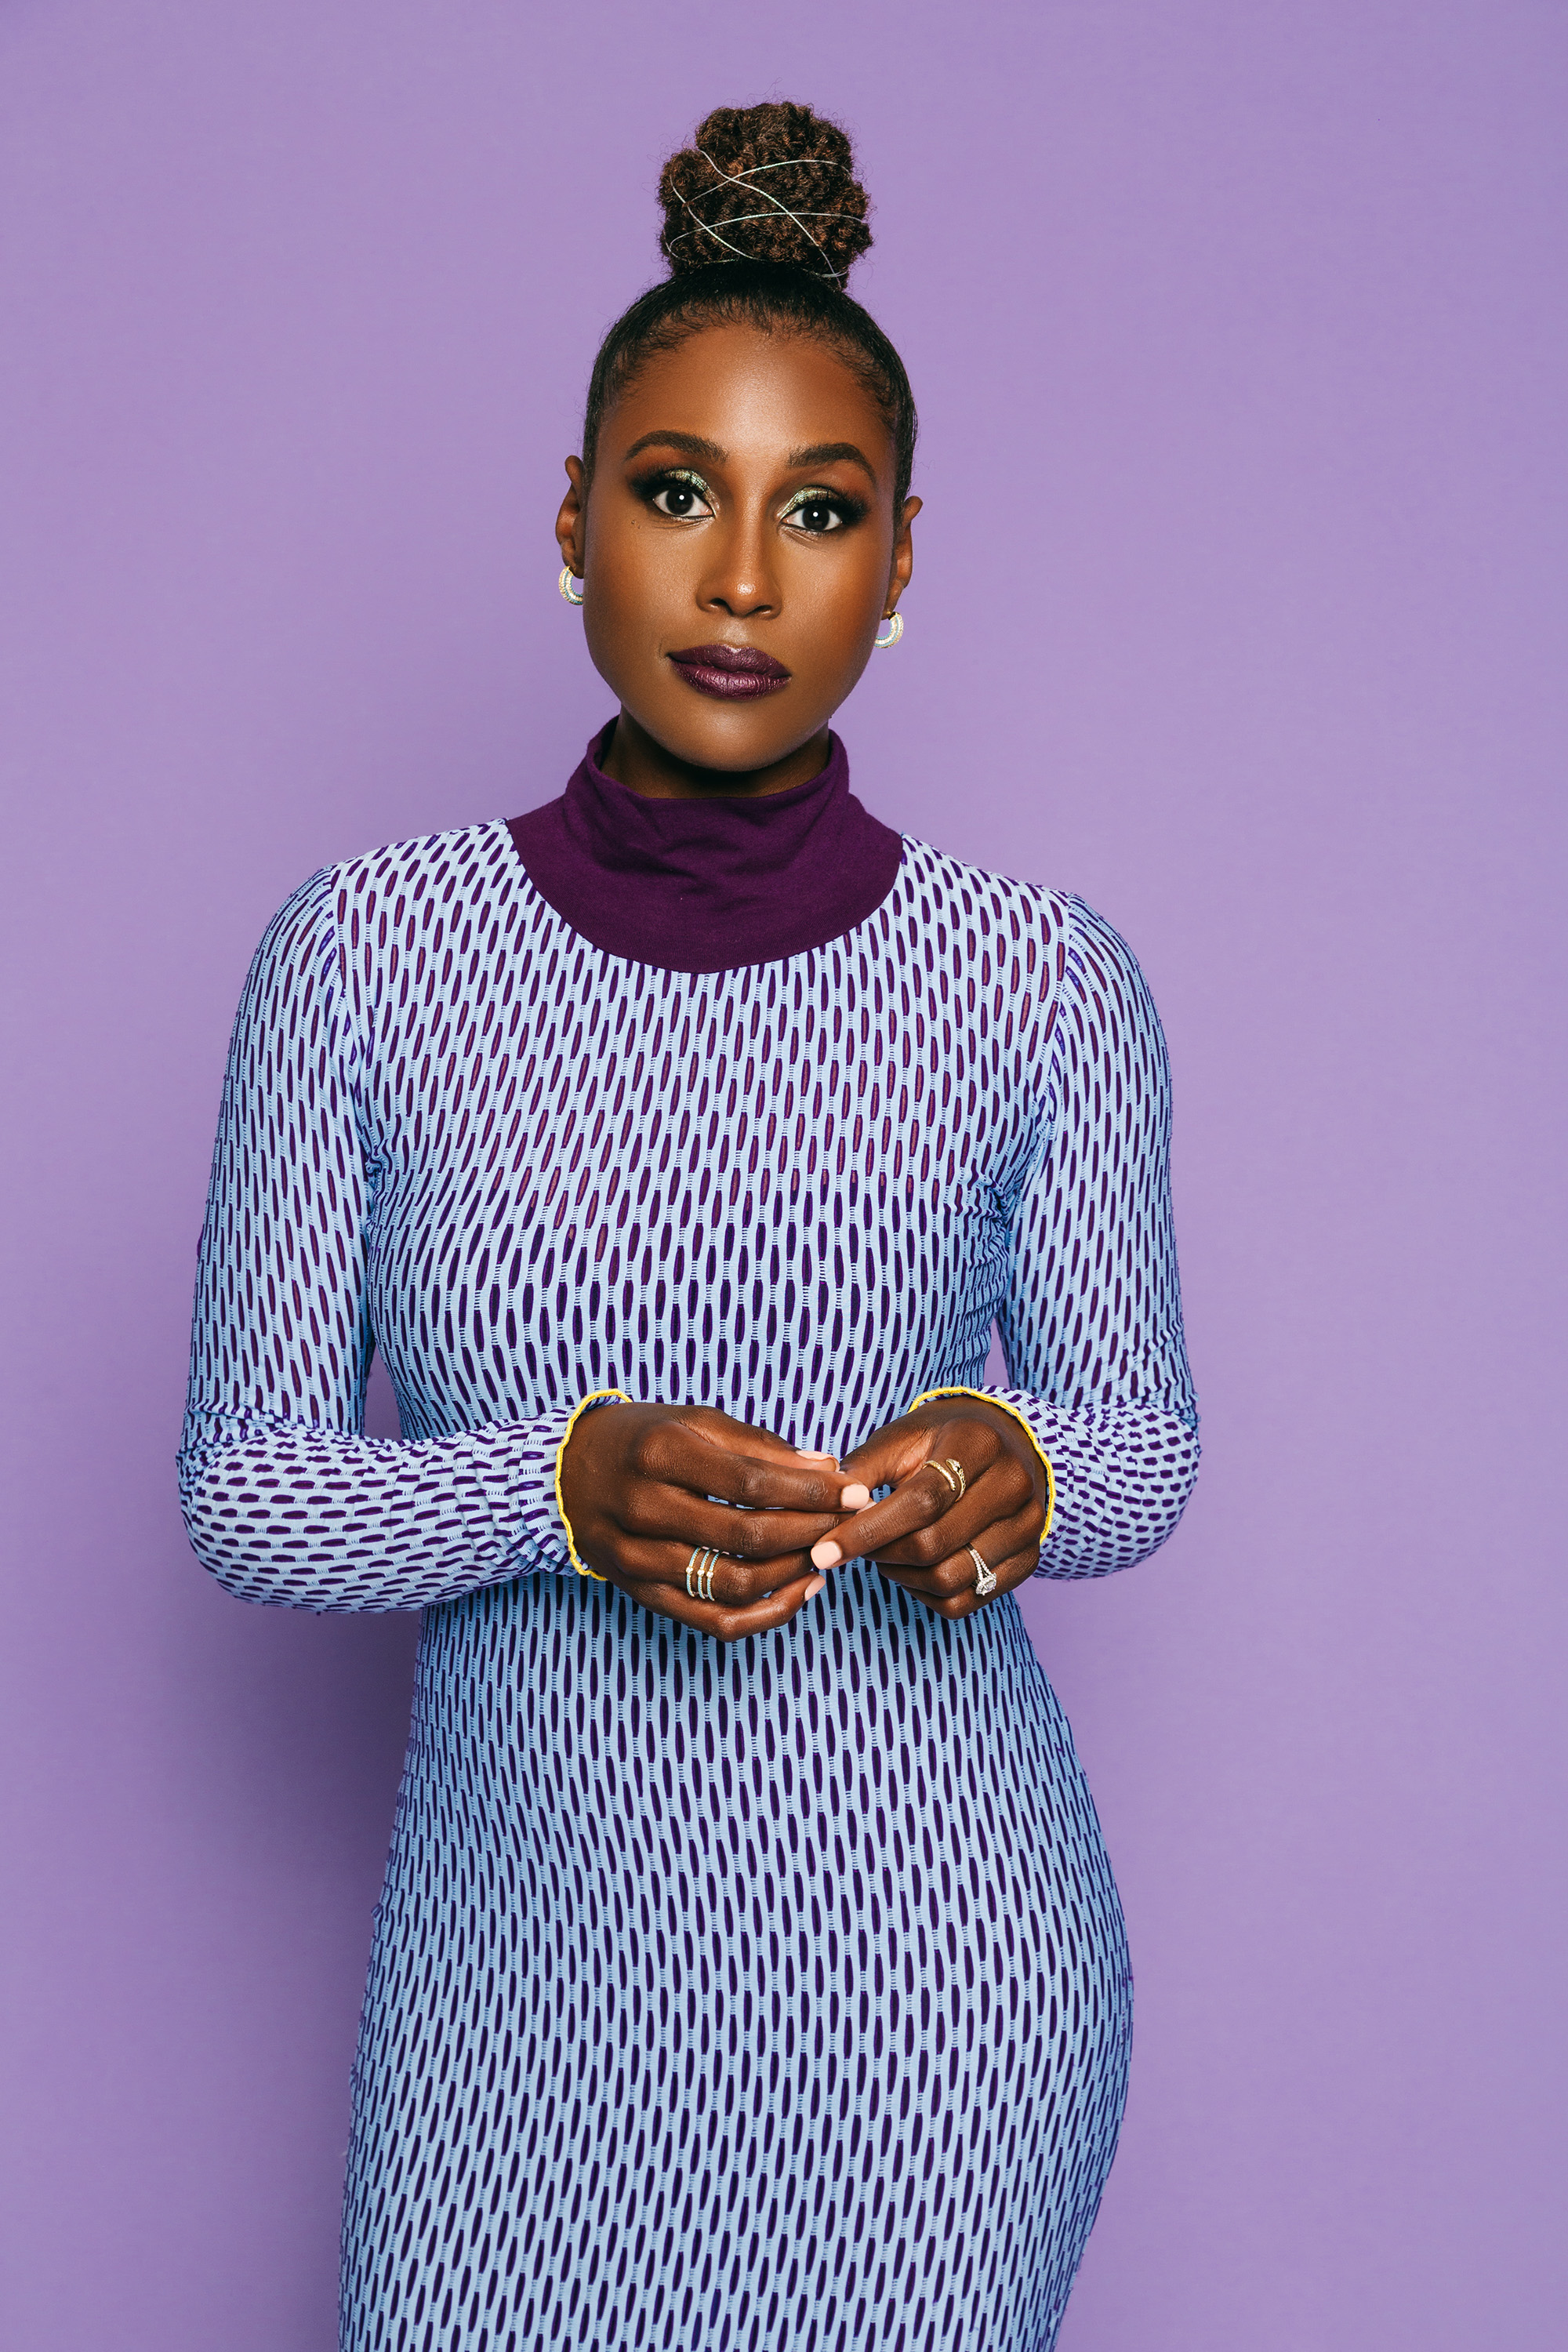 Star-Studded: Issa Rae’s HOORAE x Kennedy Center Weekend Takeover Adds KeKe Palmer, Mereba & Flo Milli To The Lineup